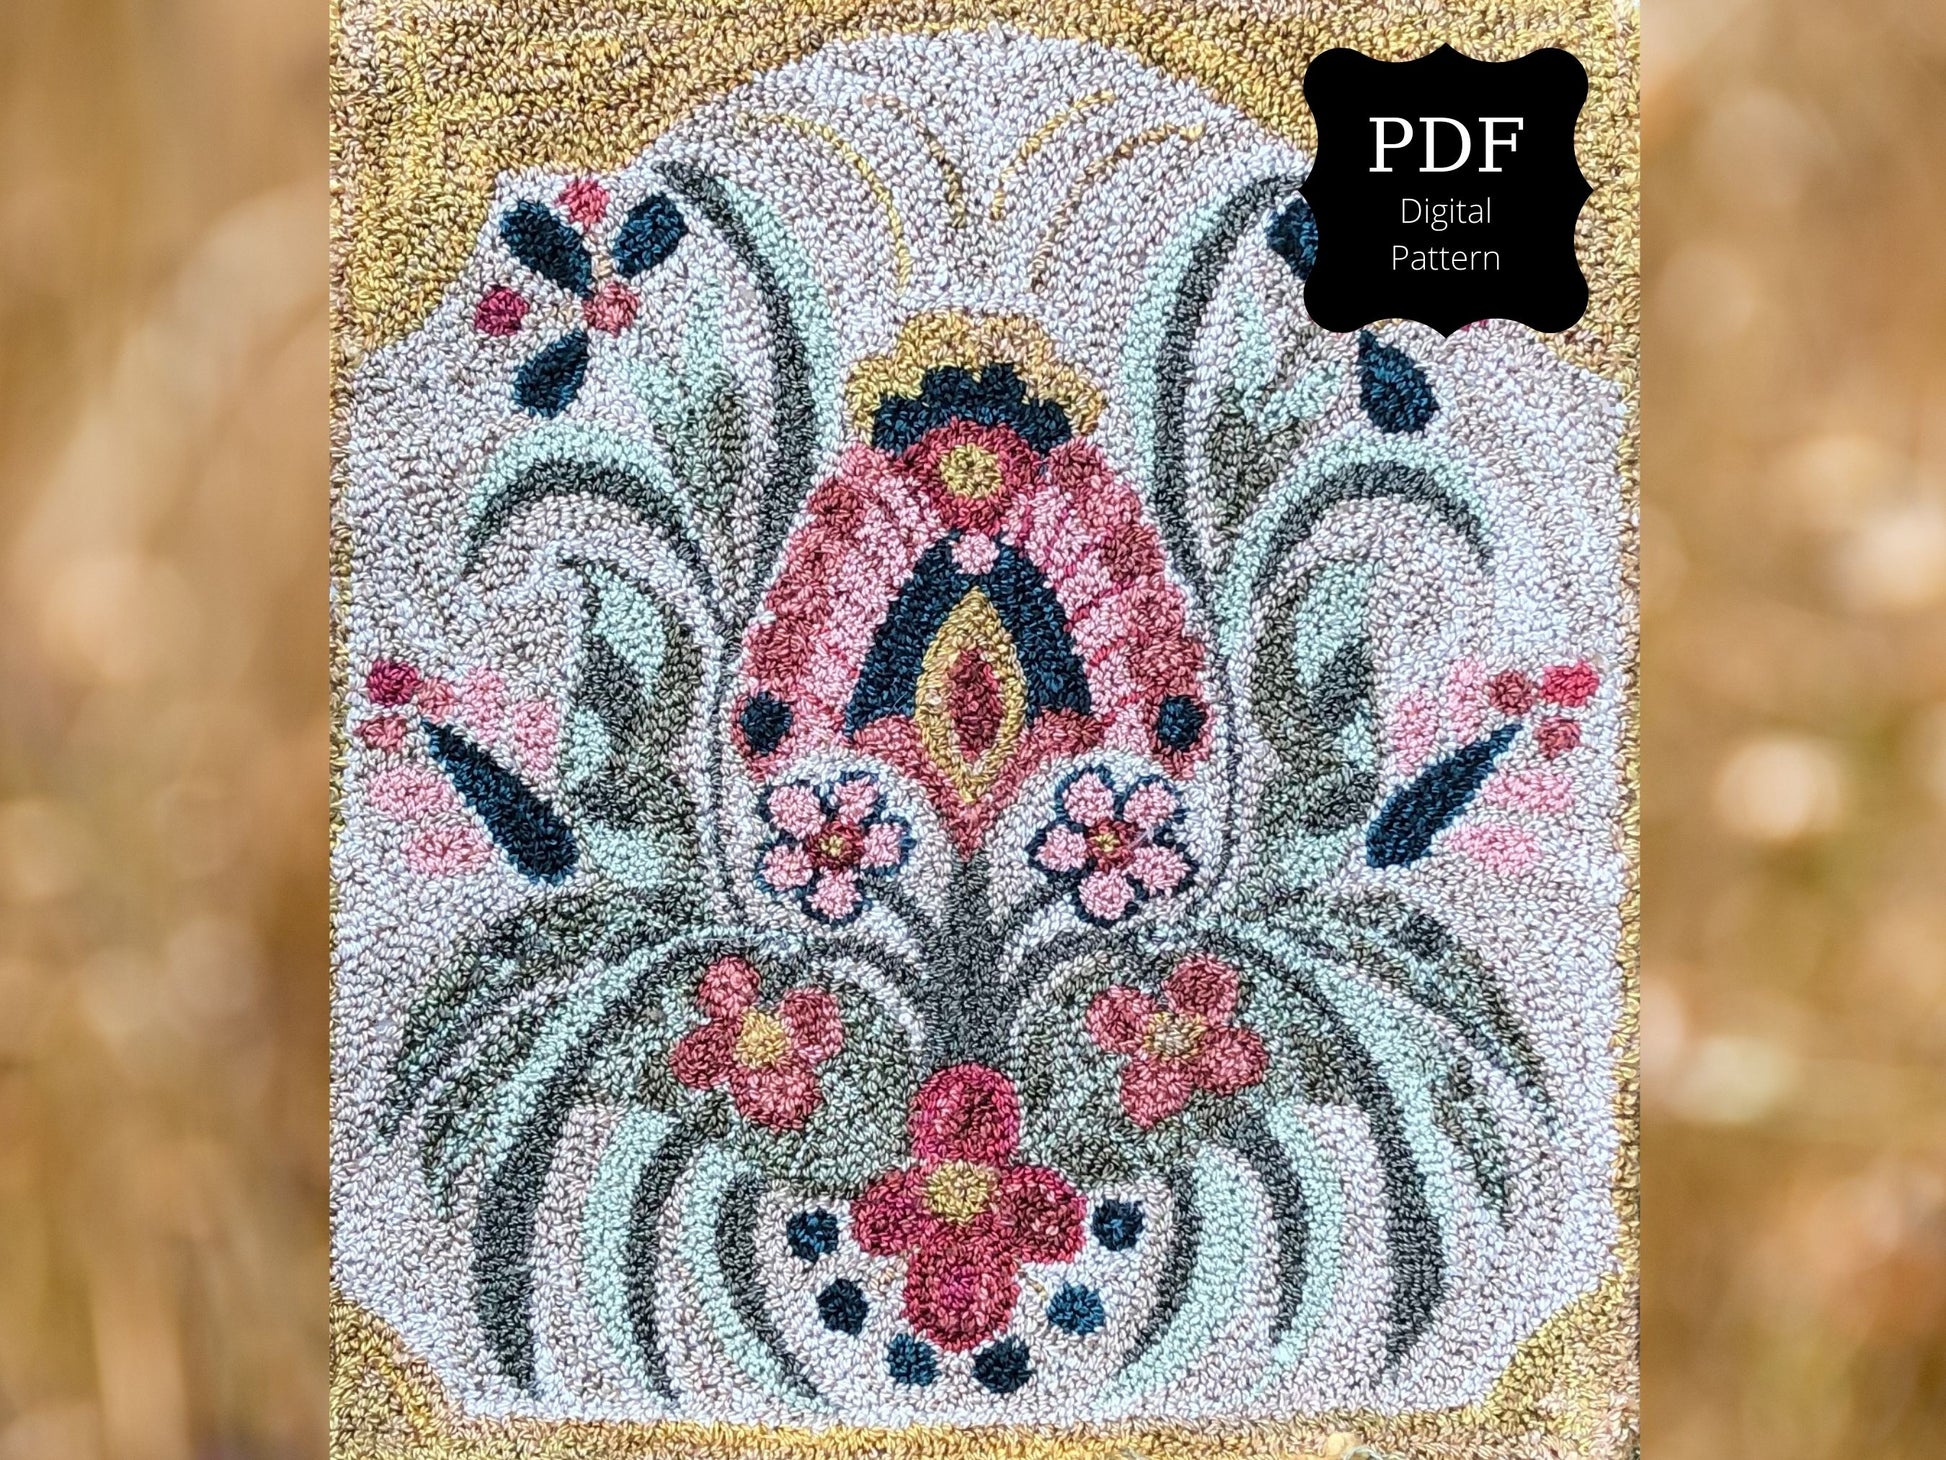 Gracious PDF Digital Punch Needle Pattern by Orphaned Wool. This is a beautiful floral design created by Kelly Kanyok of Orphaned Wool